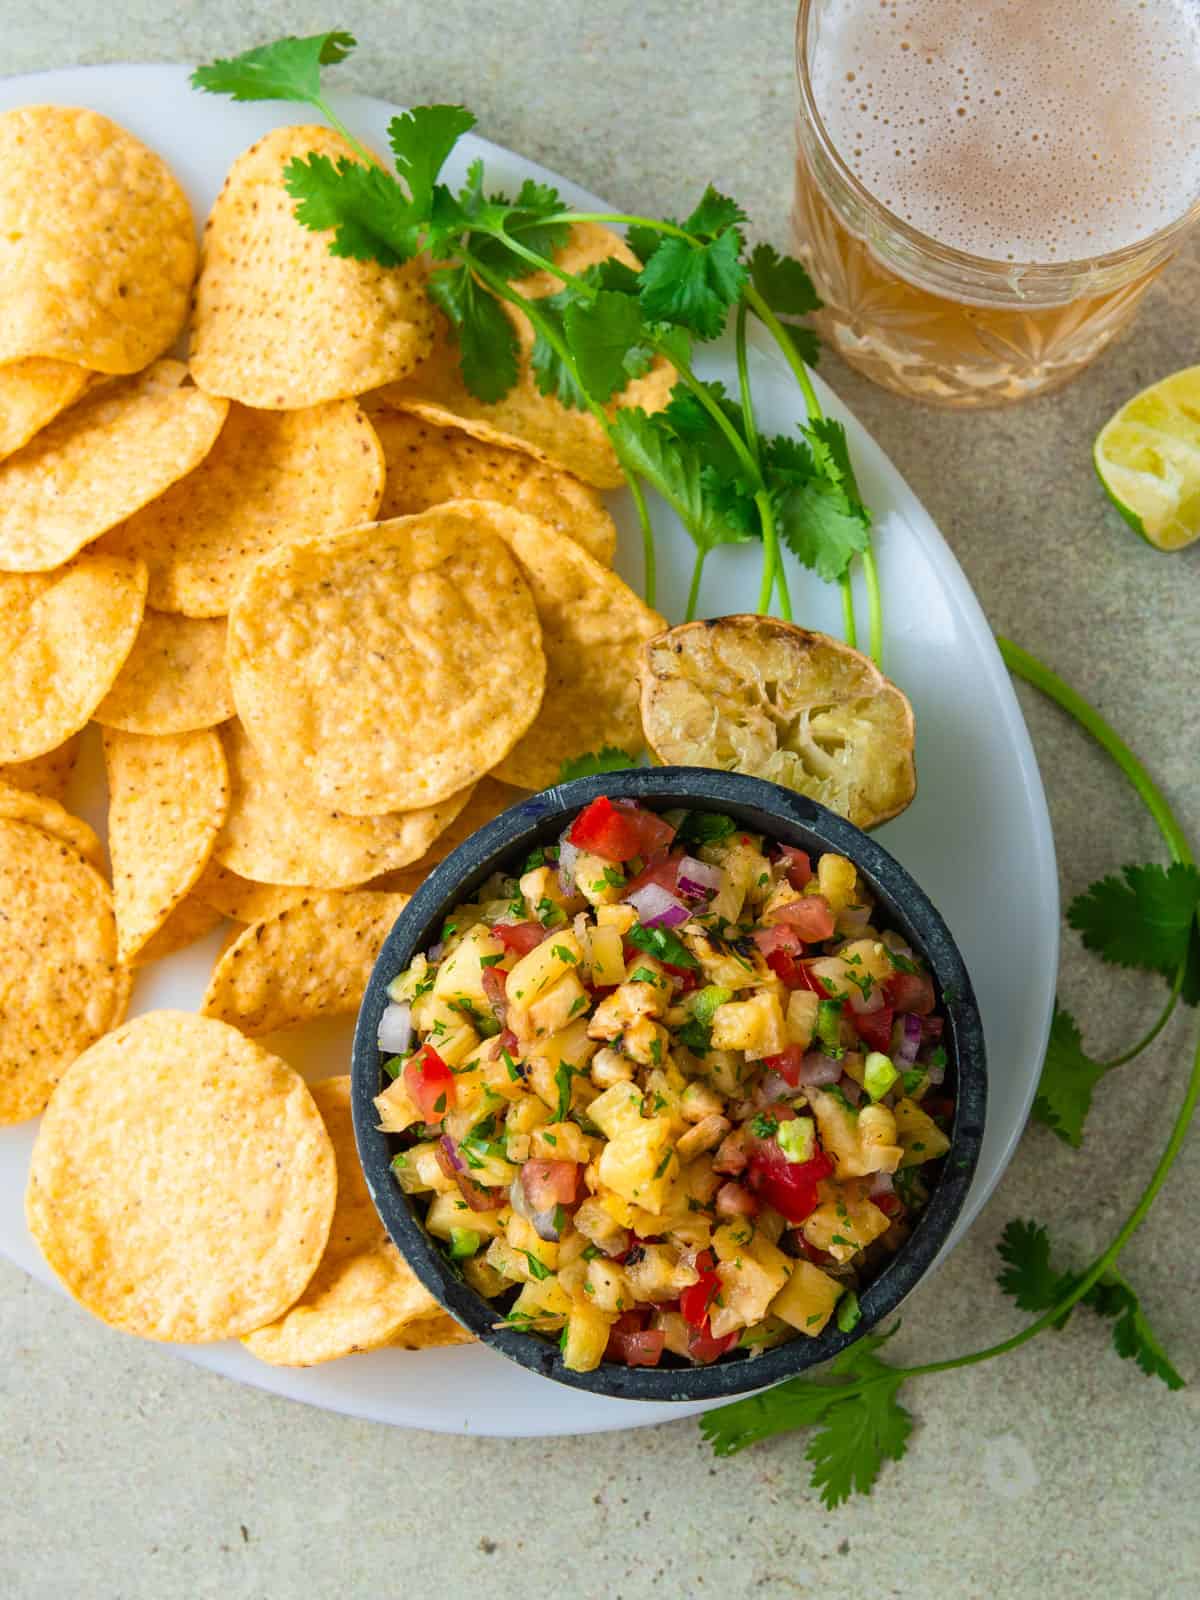 Serve grilled pineapple pico de gallo with tortilla chips and grilled lime.